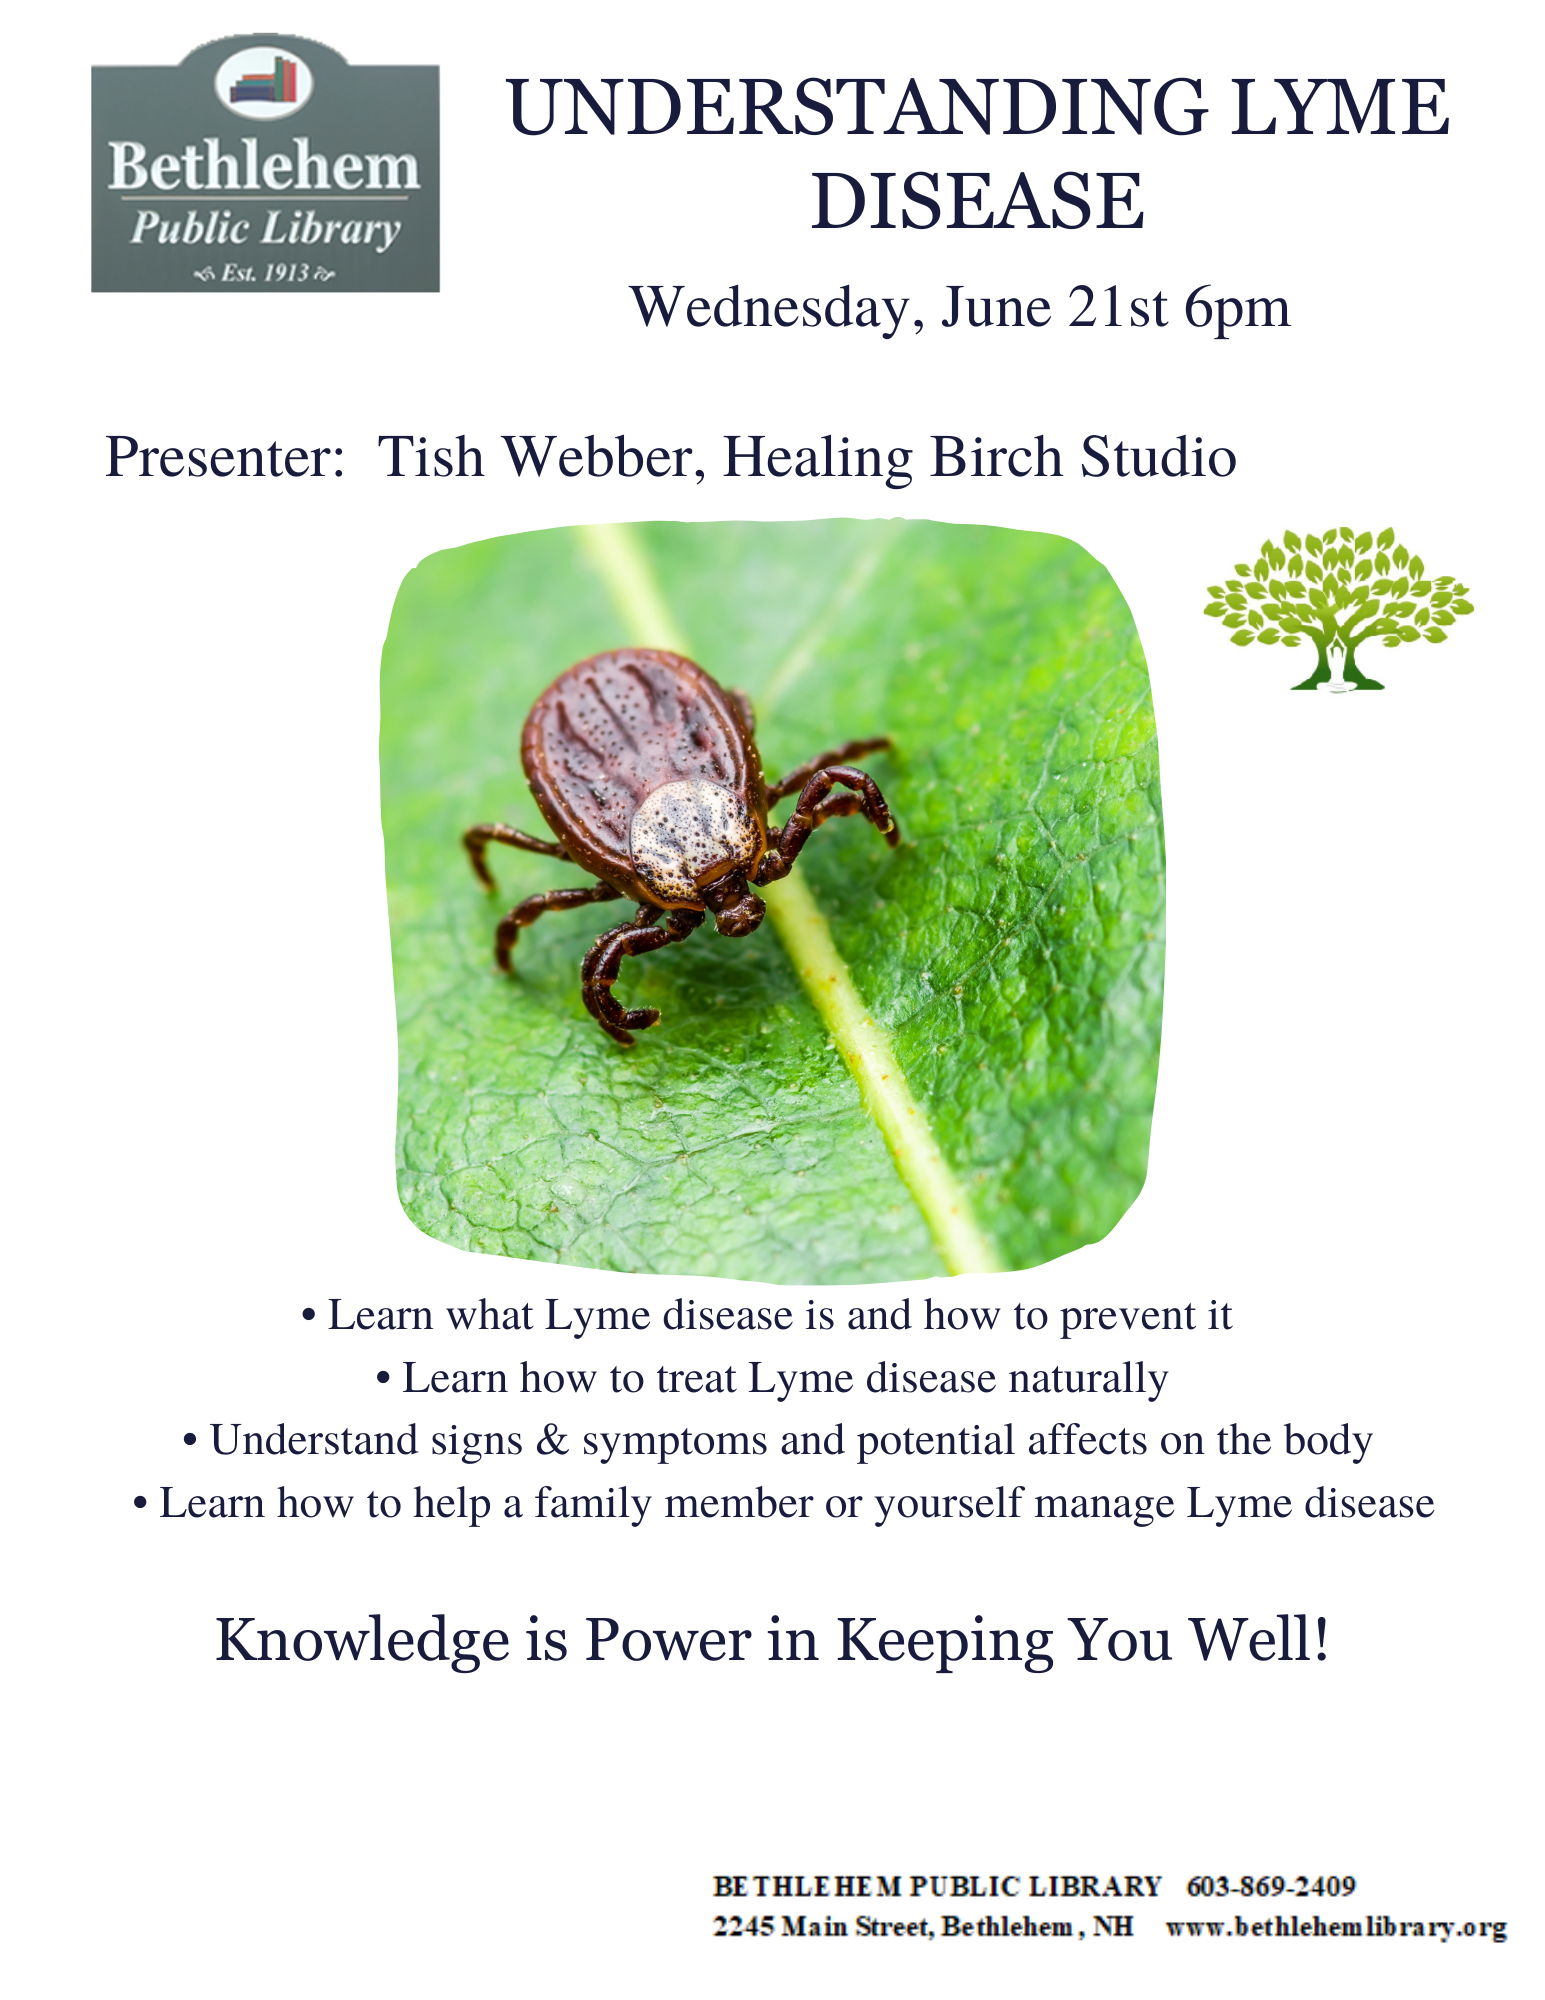 Understanding Lyme Disease Wednesday, June 21st 6pm Learn what Lyme Disease is, how to prevent it, how to manage it, and treat it     naturally.  Tish Webber of Healing Birch Studio presents on this timely topic.